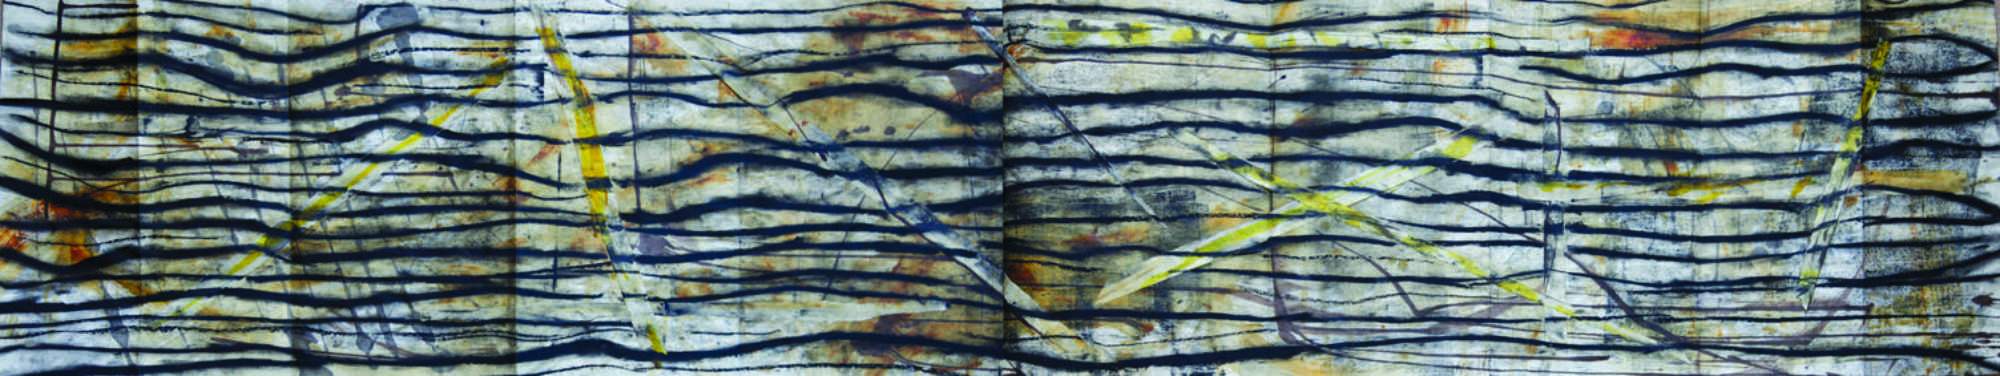 Linear 2012 - Mixed Media on Cartridge - 3360 x 600mm - SOLD